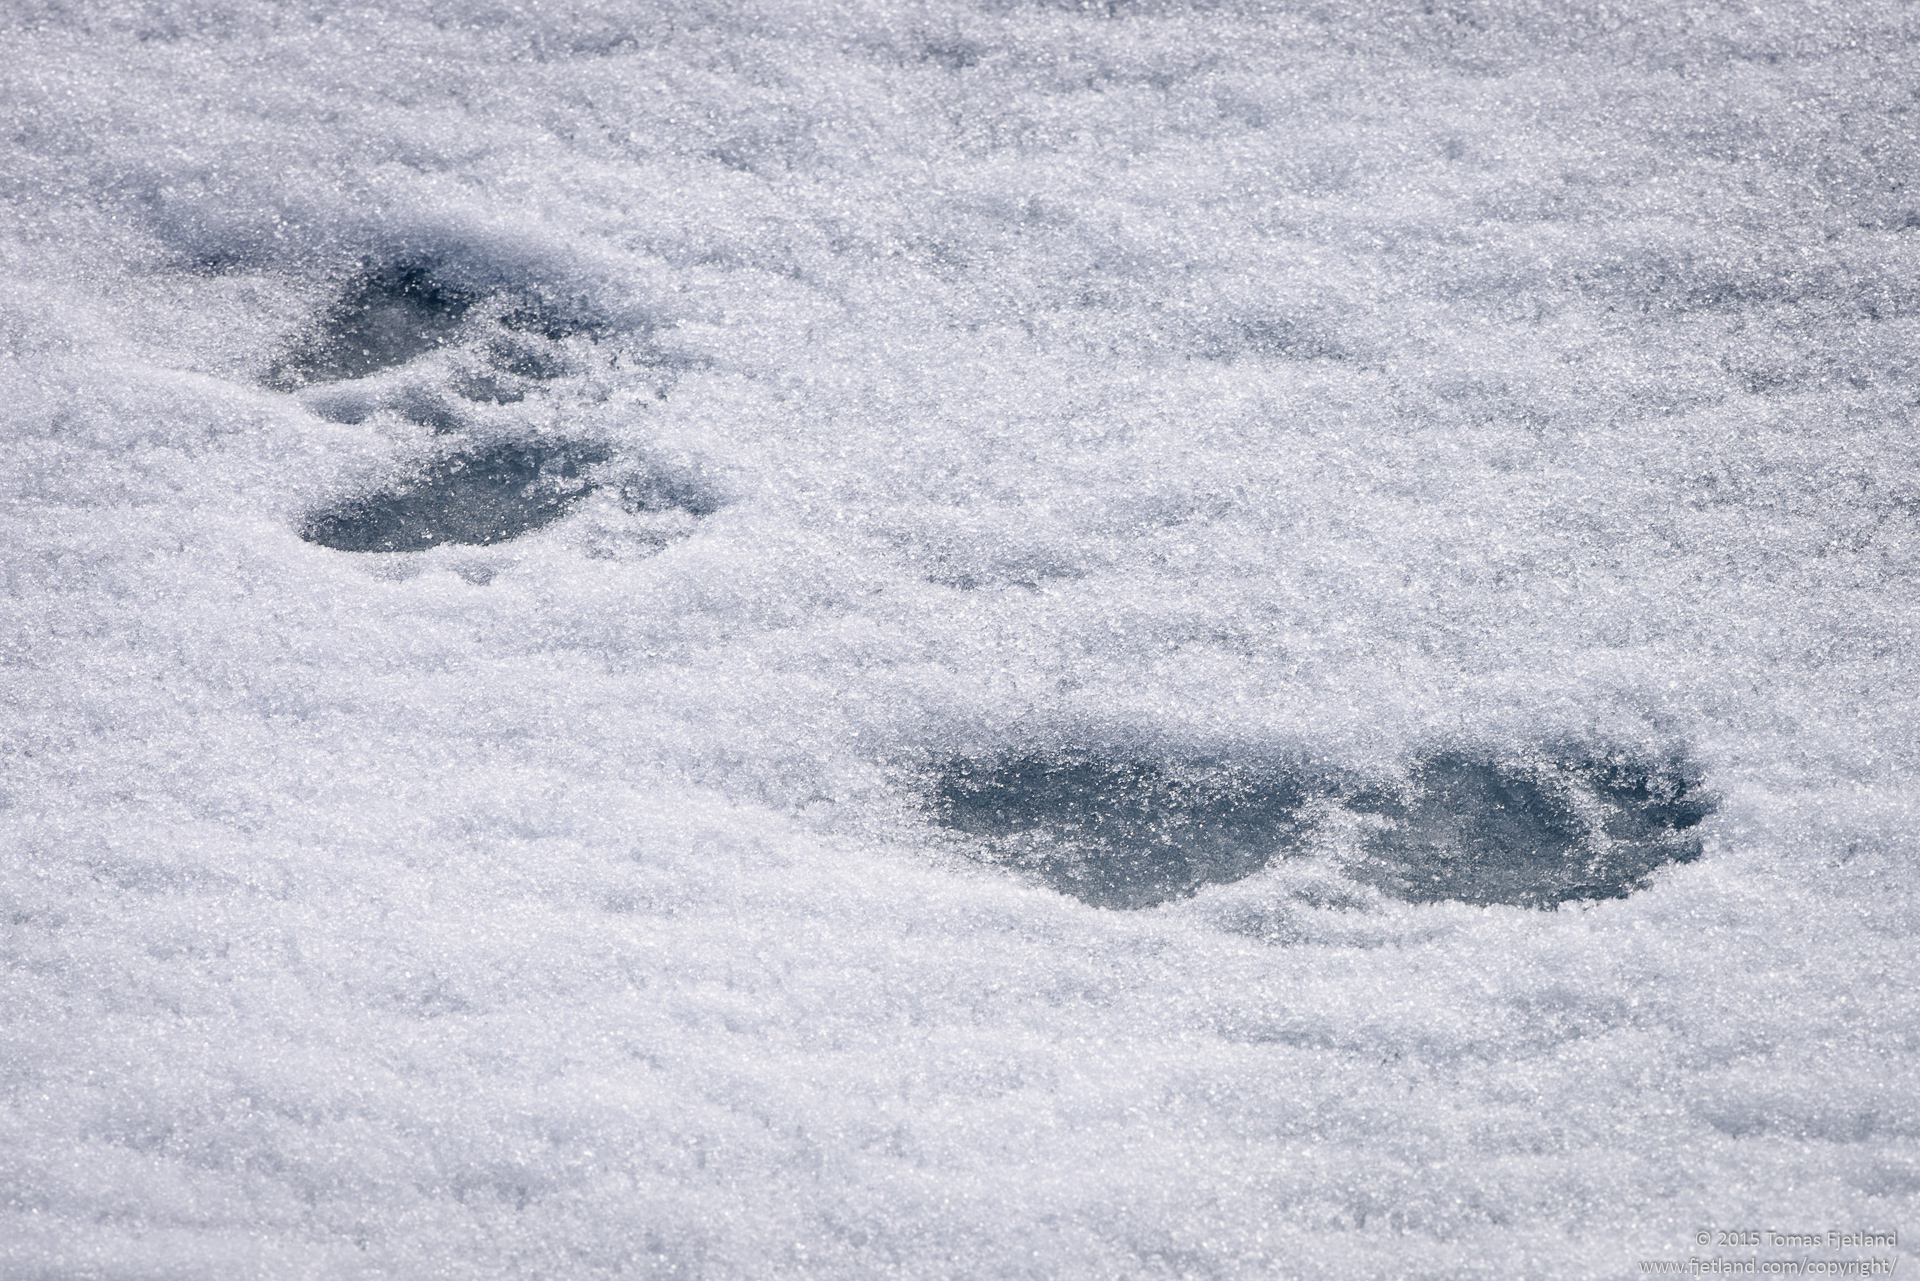 First signs of polar bears on our trip; tracks in the seaice north of Spitsbergen